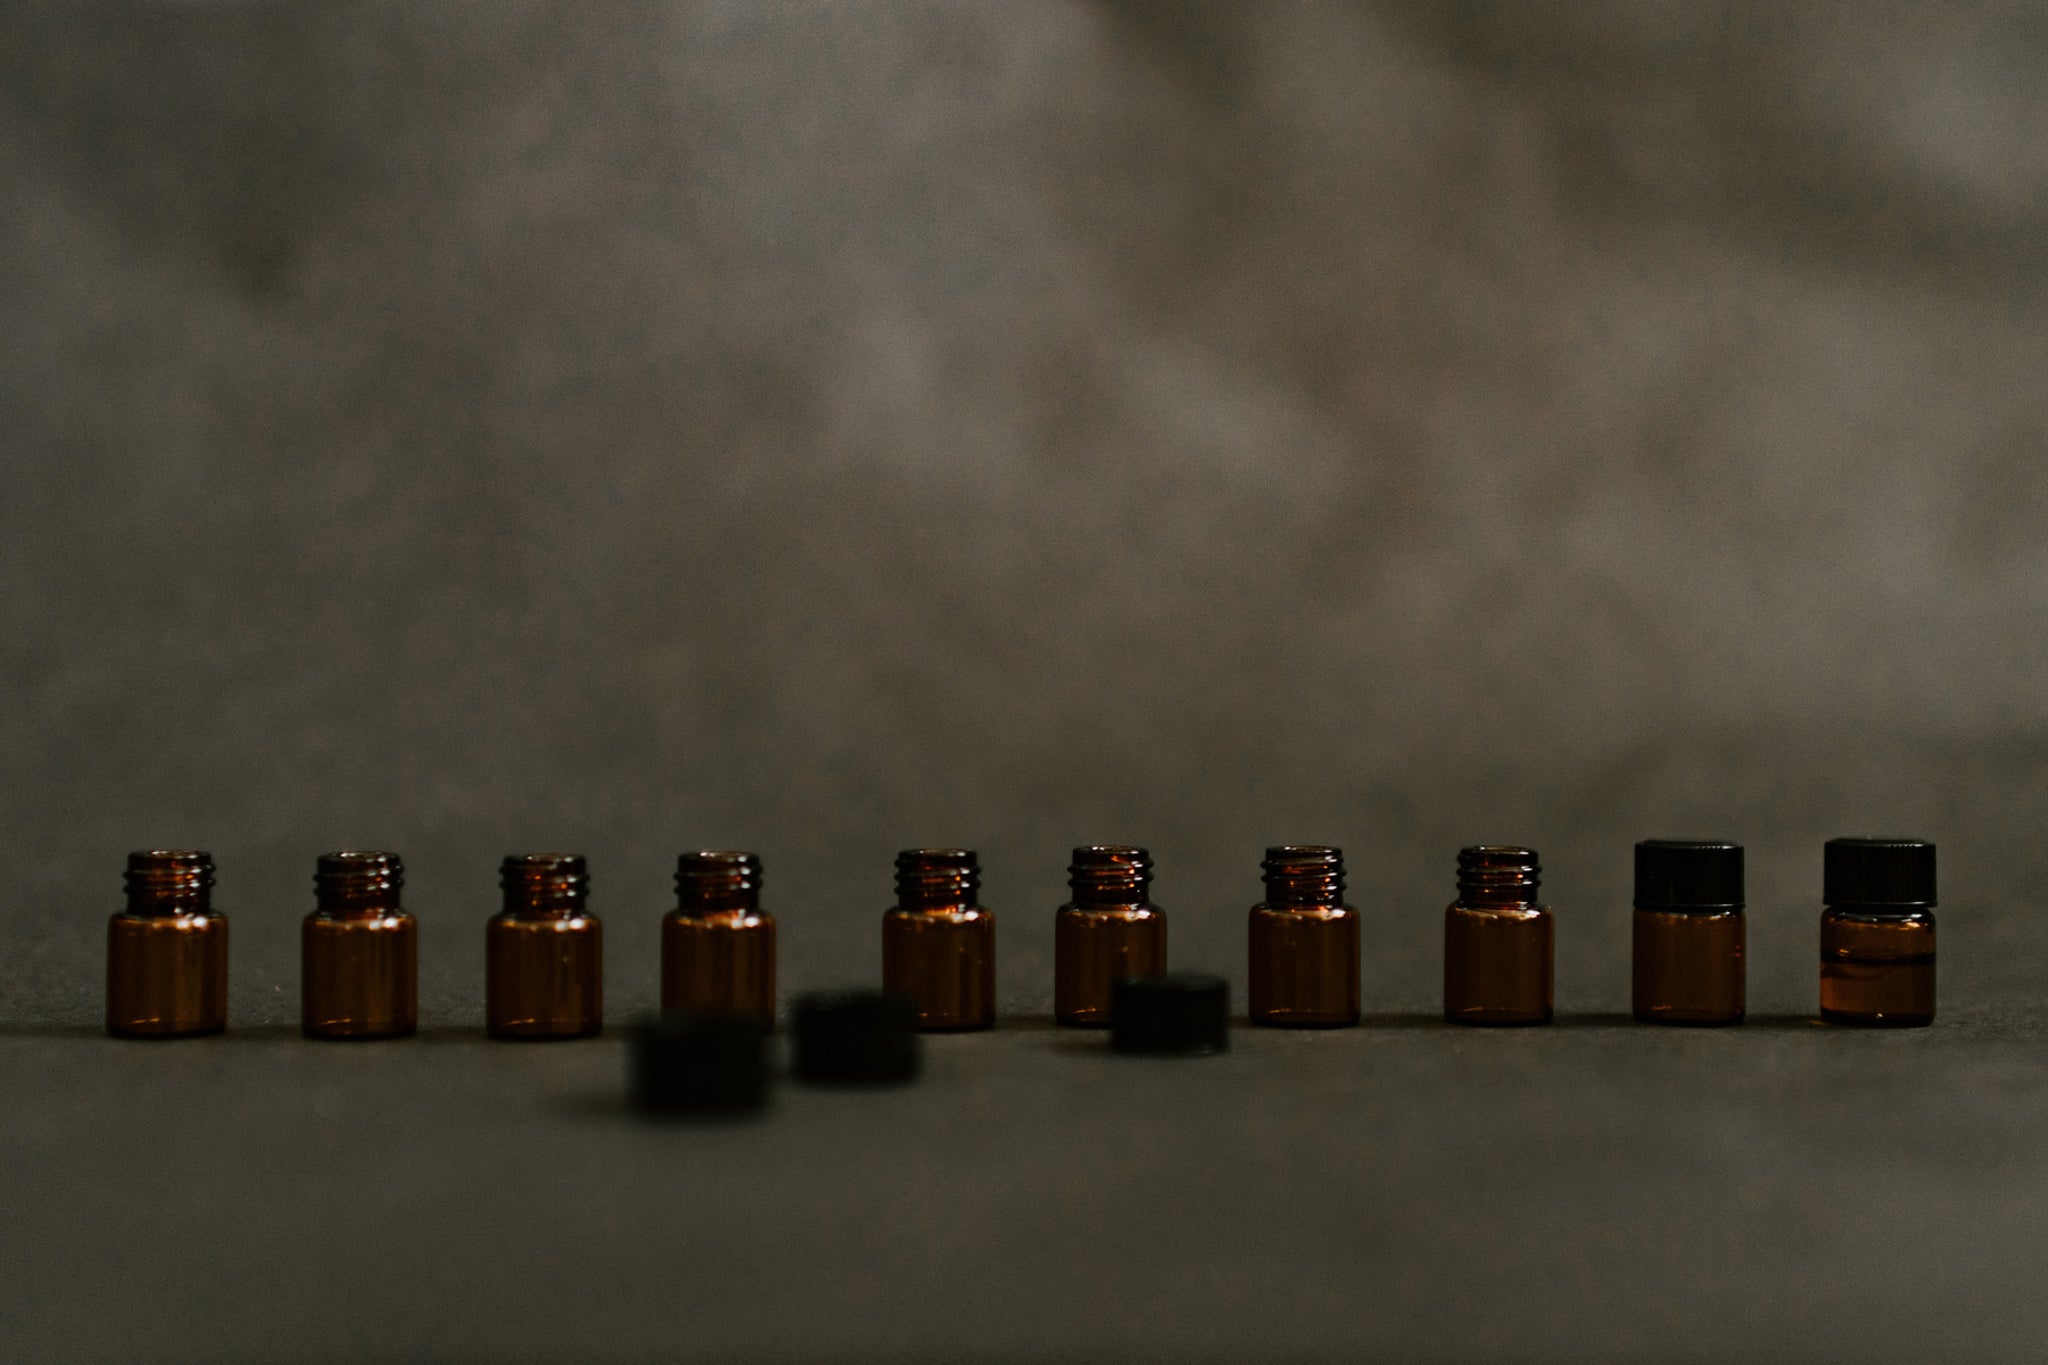 ten essential oils in brown bottles on table smoky brown background